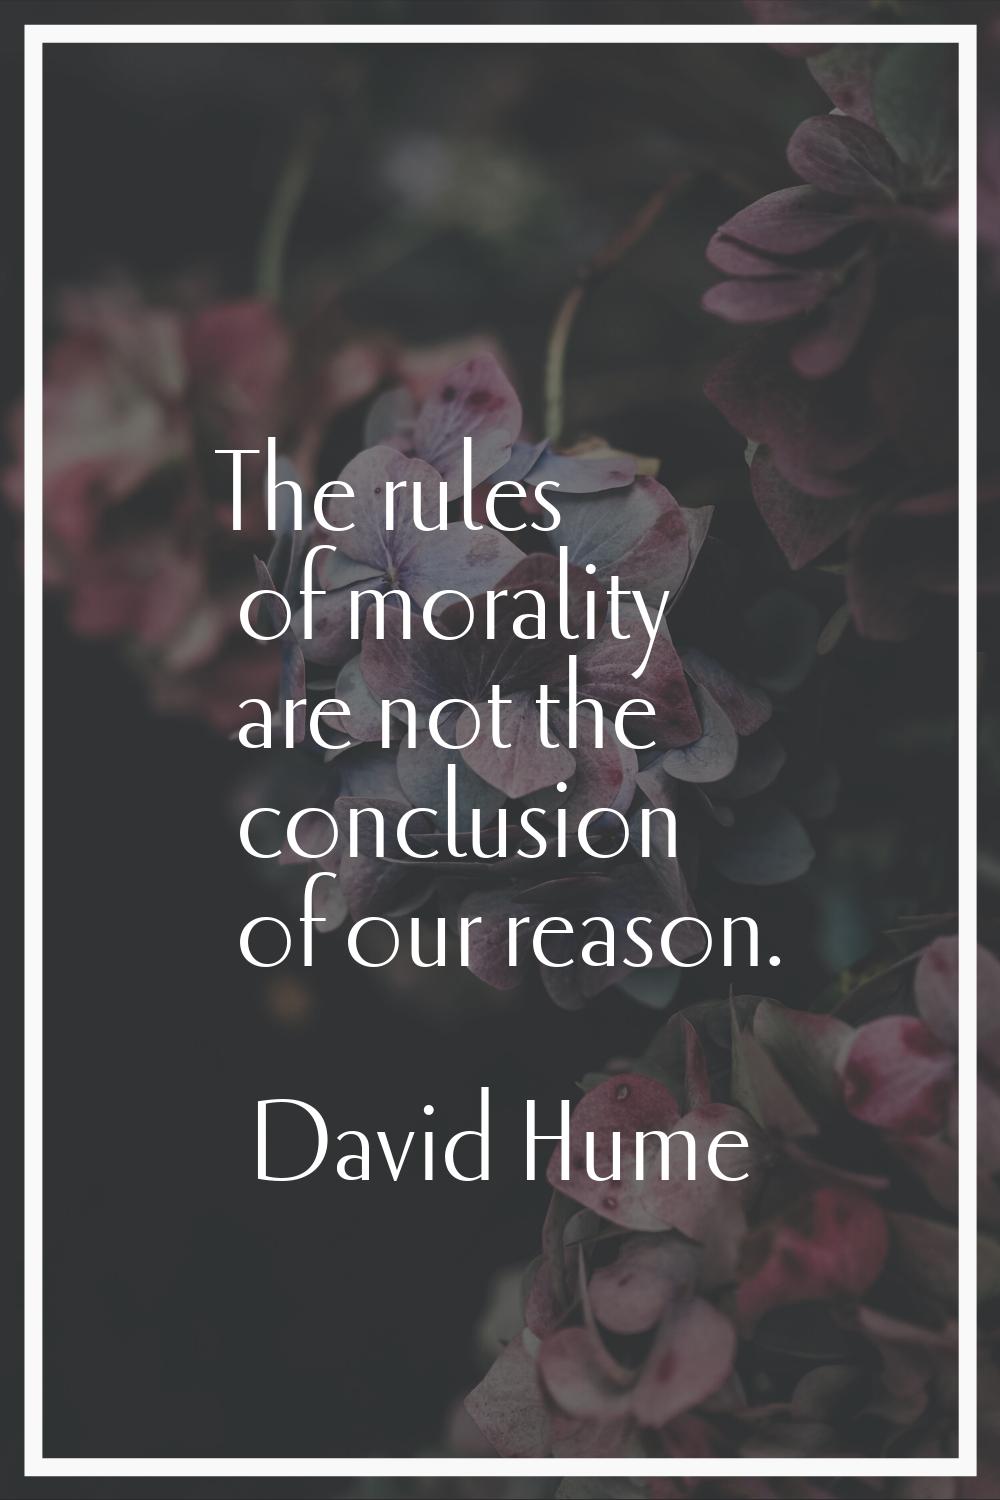 The rules of morality are not the conclusion of our reason.